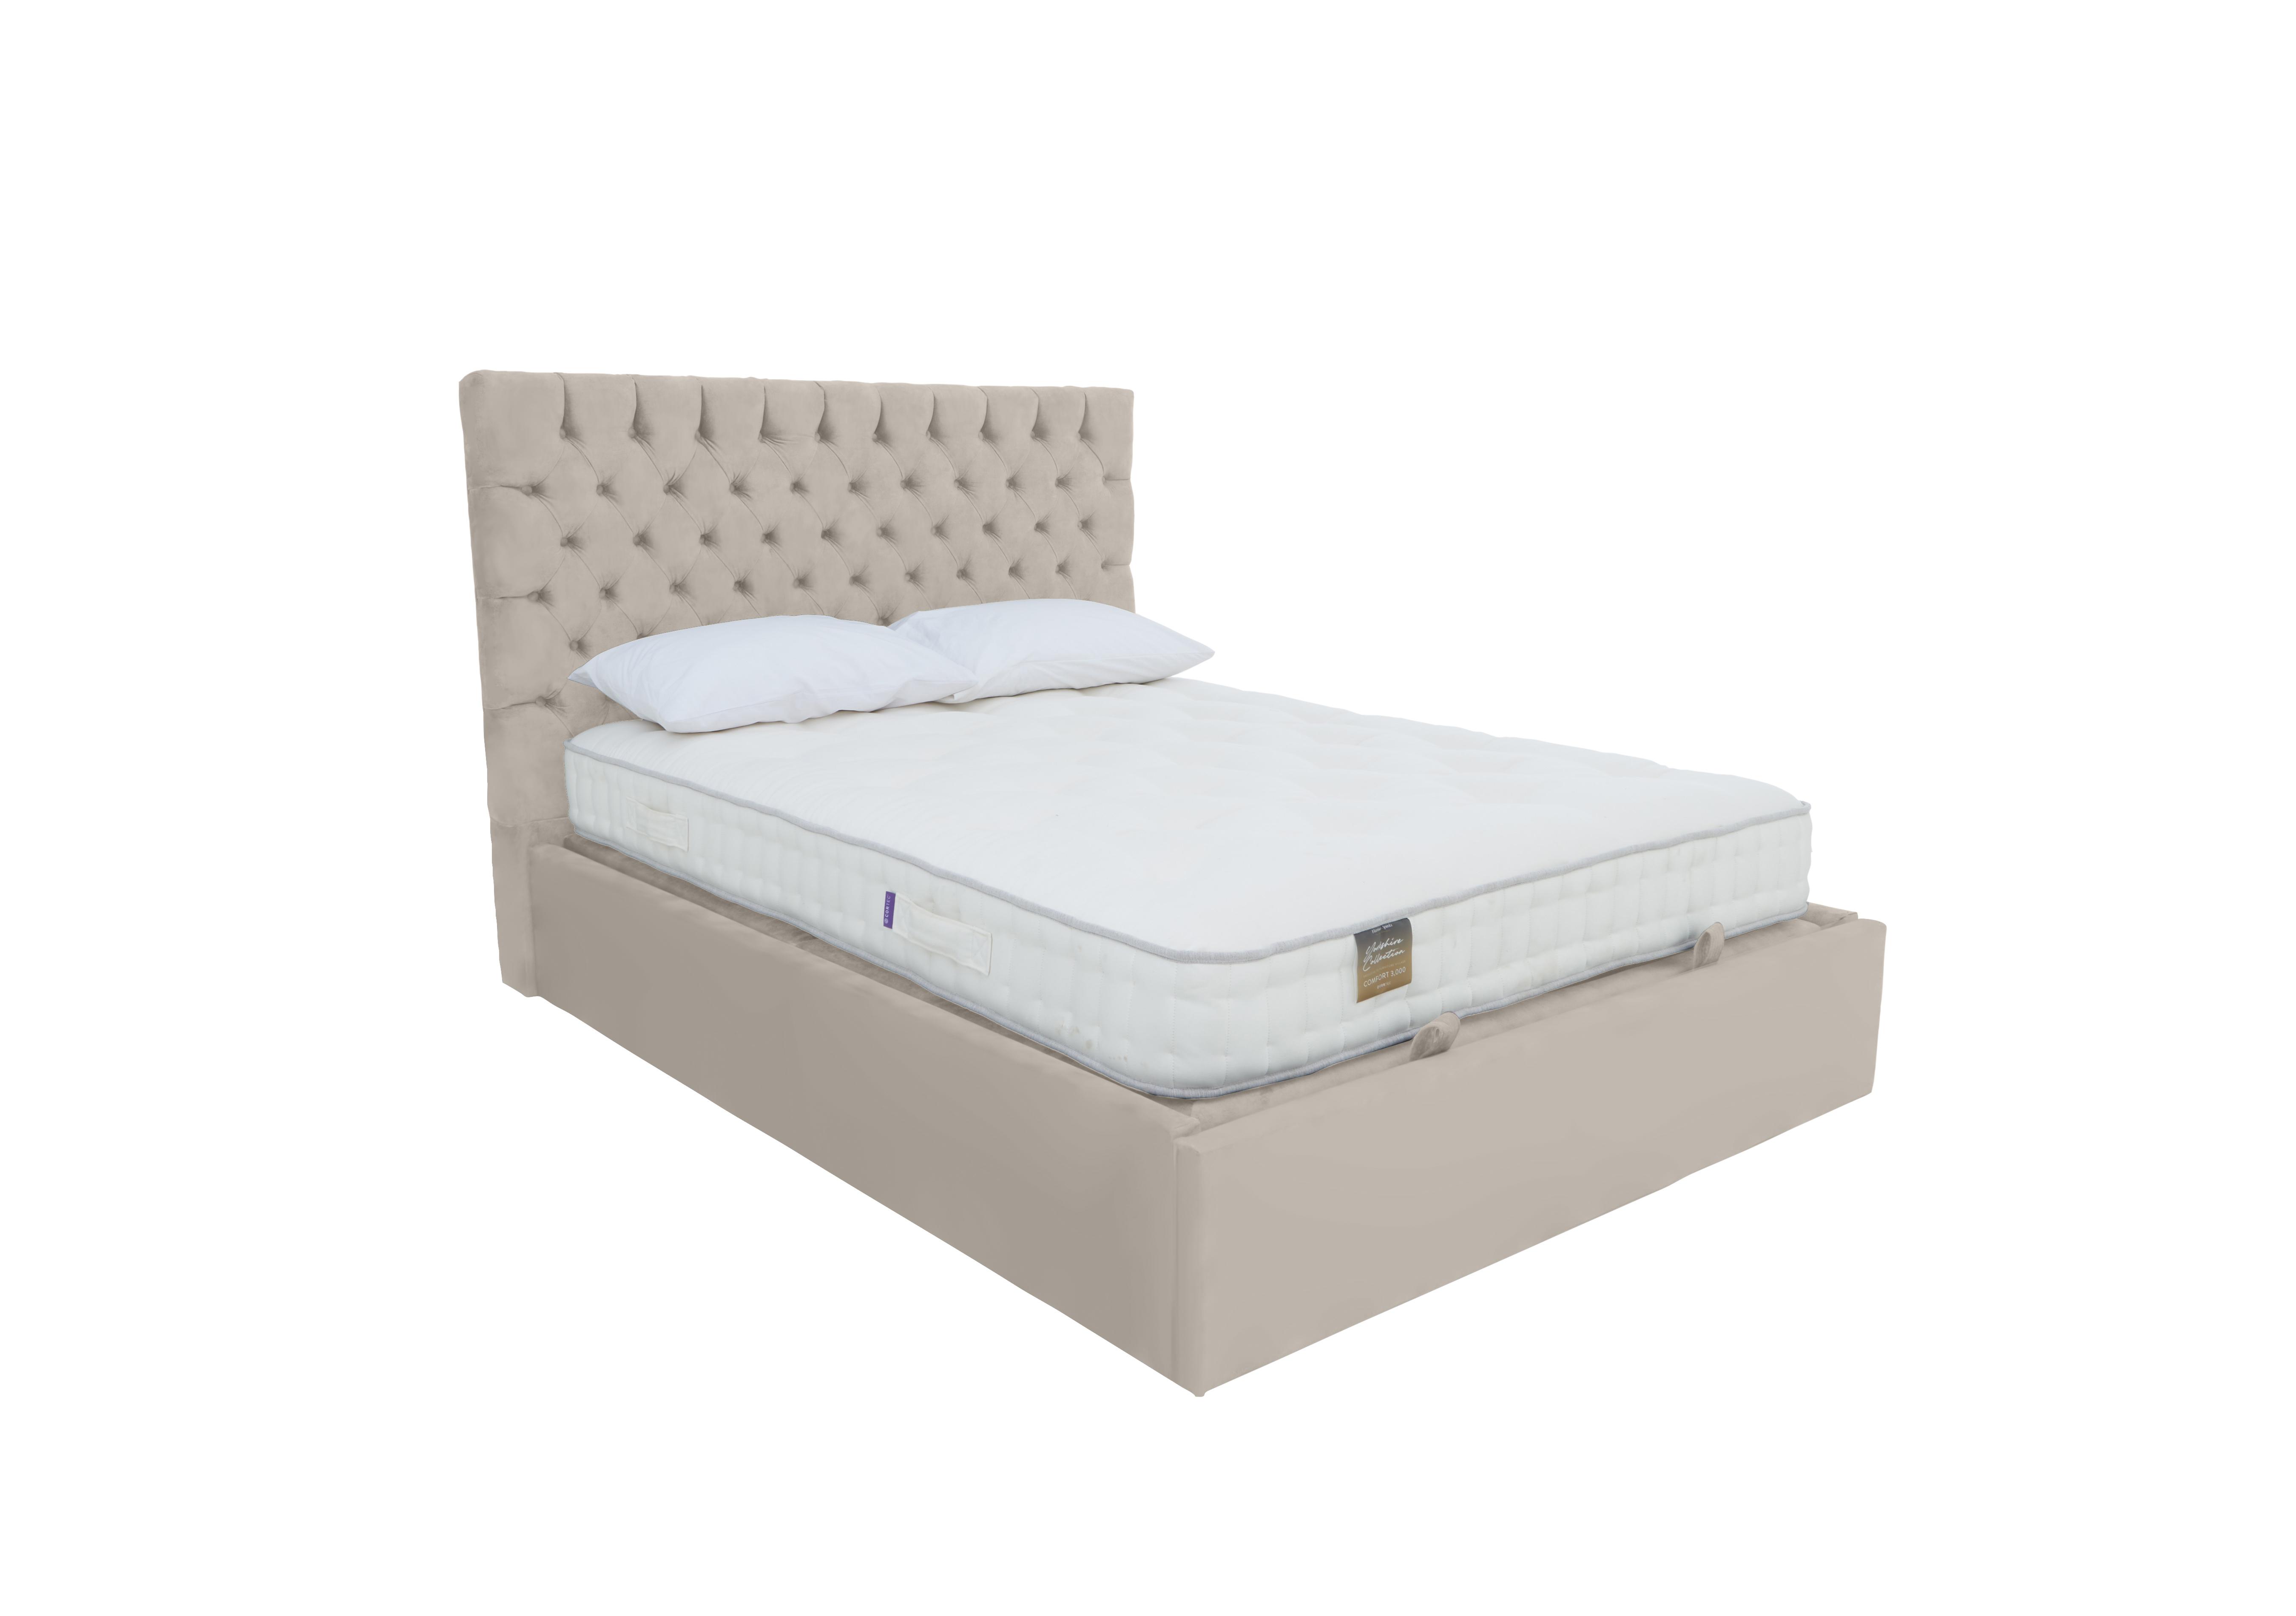 Sergio Ottoman Bed Frame in Smooth Stone on Furniture Village